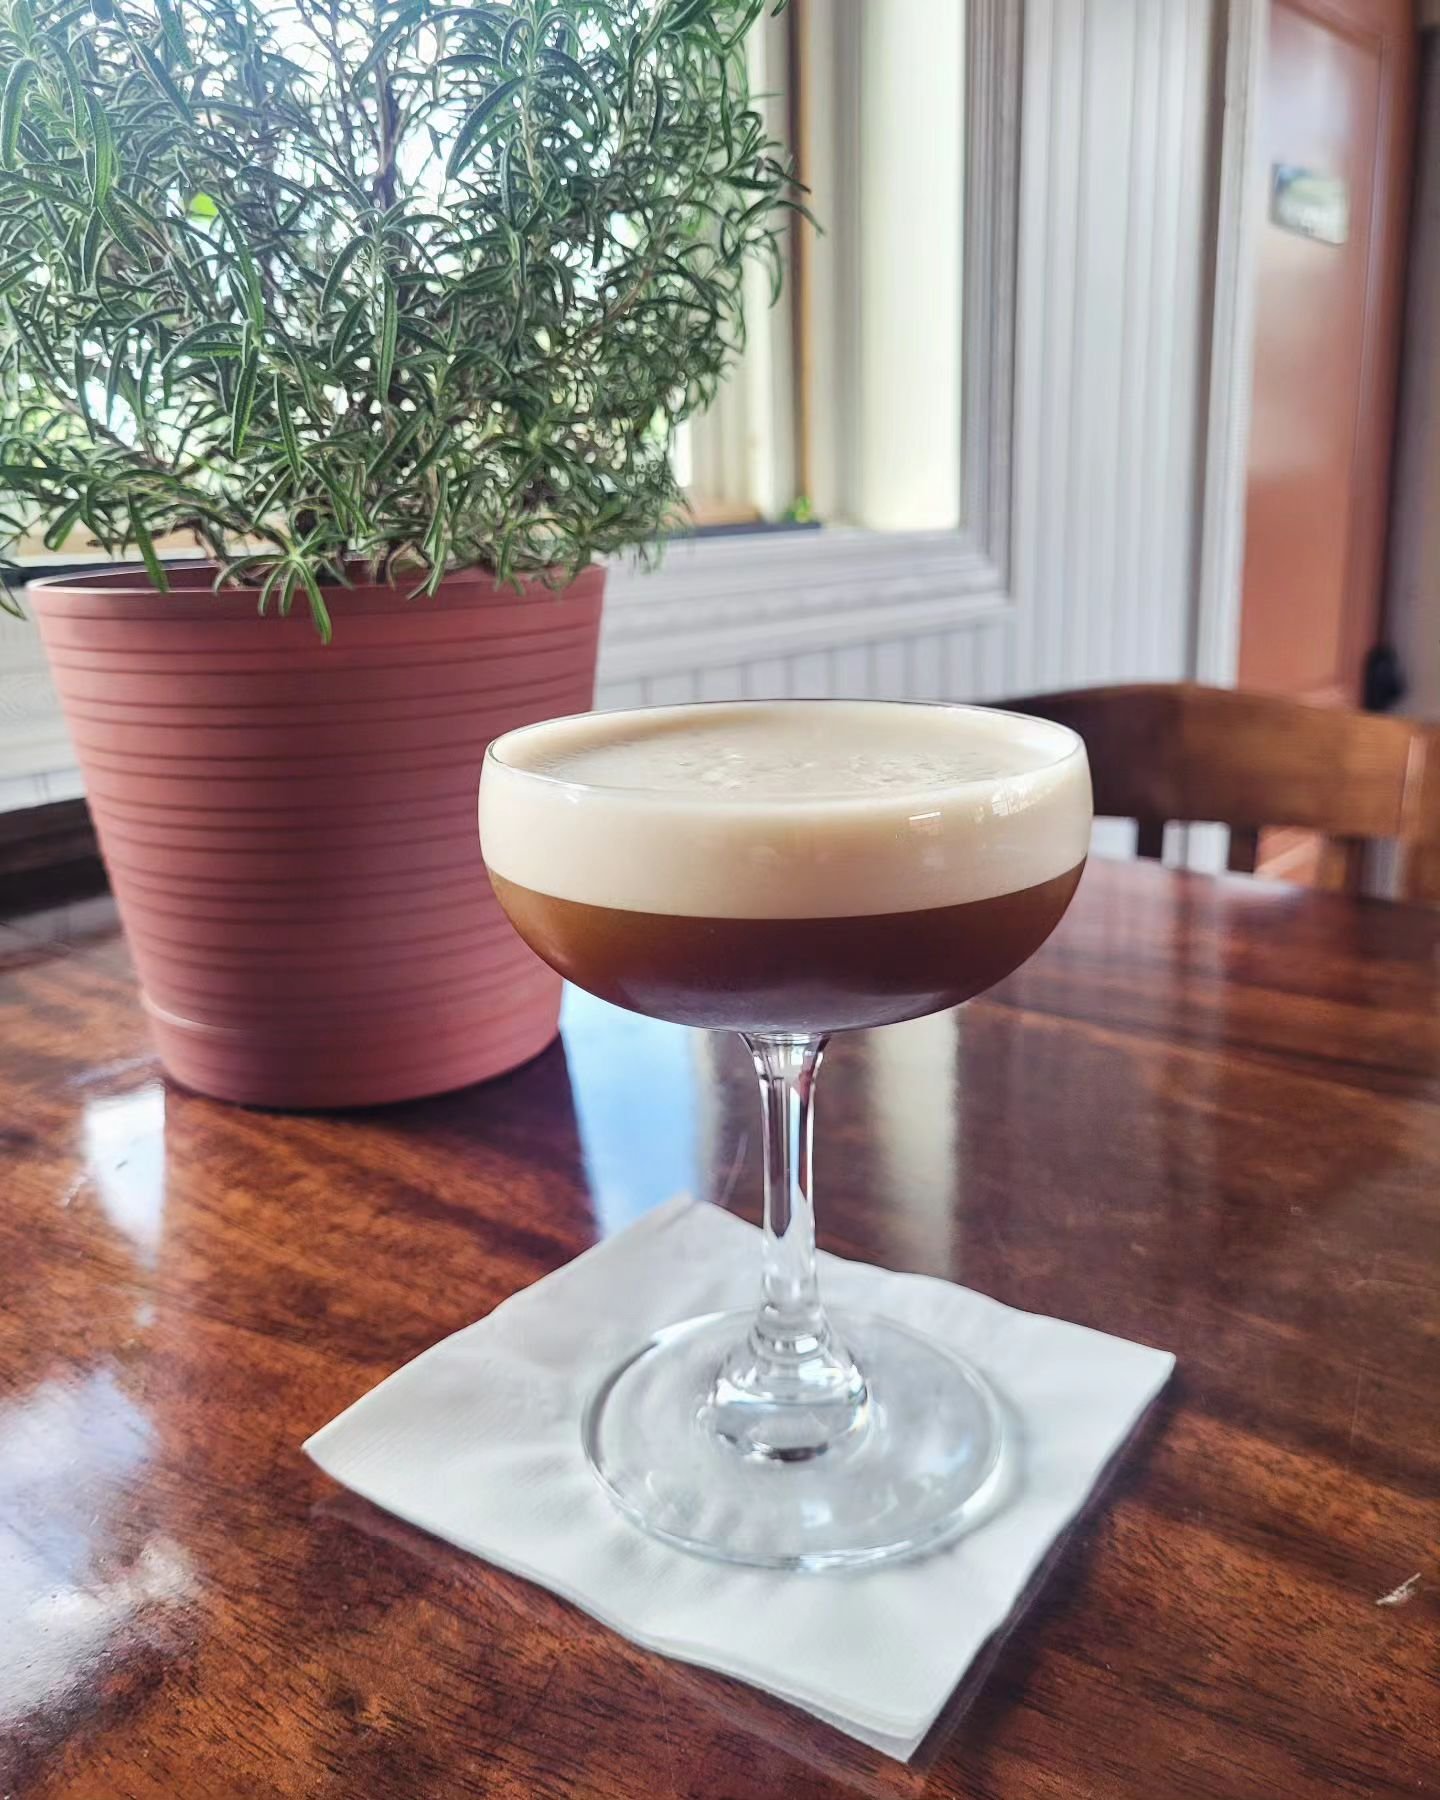 It's $2 off well Tuesday! 

Or if you need a yummy pick me up try our cold brew espresso cocktail!

Open 5pm-12am

#wilmingtonnc #greenfieldlakeyachtclub #downtownwilmington #drinks #bar #cocktails #espressomartini #instagood #greenfieldlake #carolin